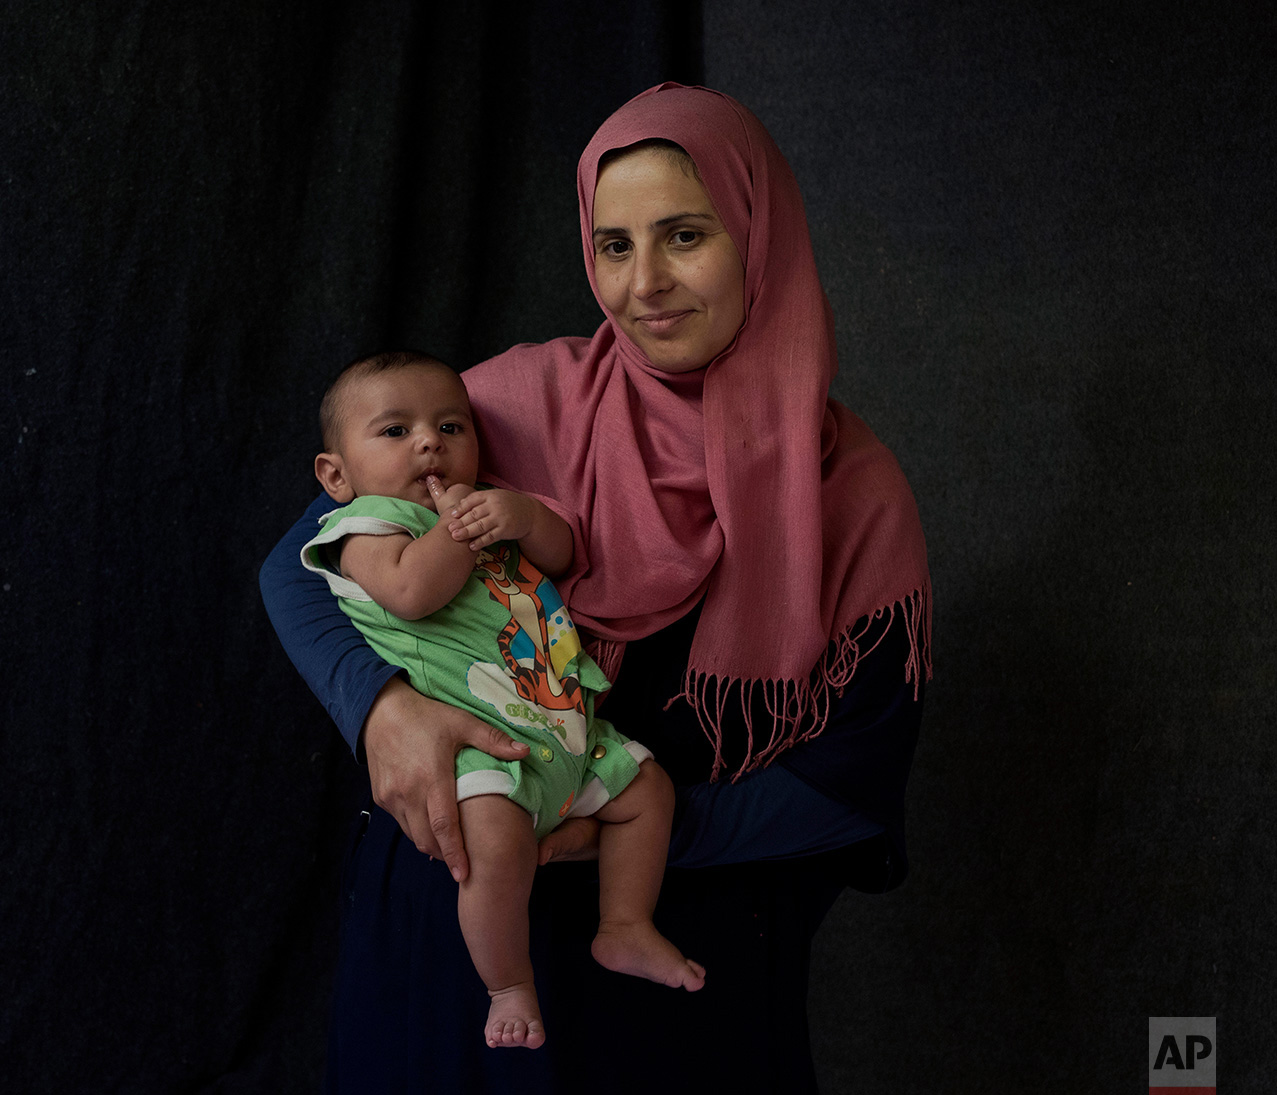  In this Tuesday Sept. 13, 2016, 39-year-old, Hanan Halawa, a Syrian mother from the city of Idlib poses with her baby boy Ahmad Hanash in a tent made of blankets given by the UNCHR at the Ritsona refugee camp in Greece. Hanan is one of the hundreds 